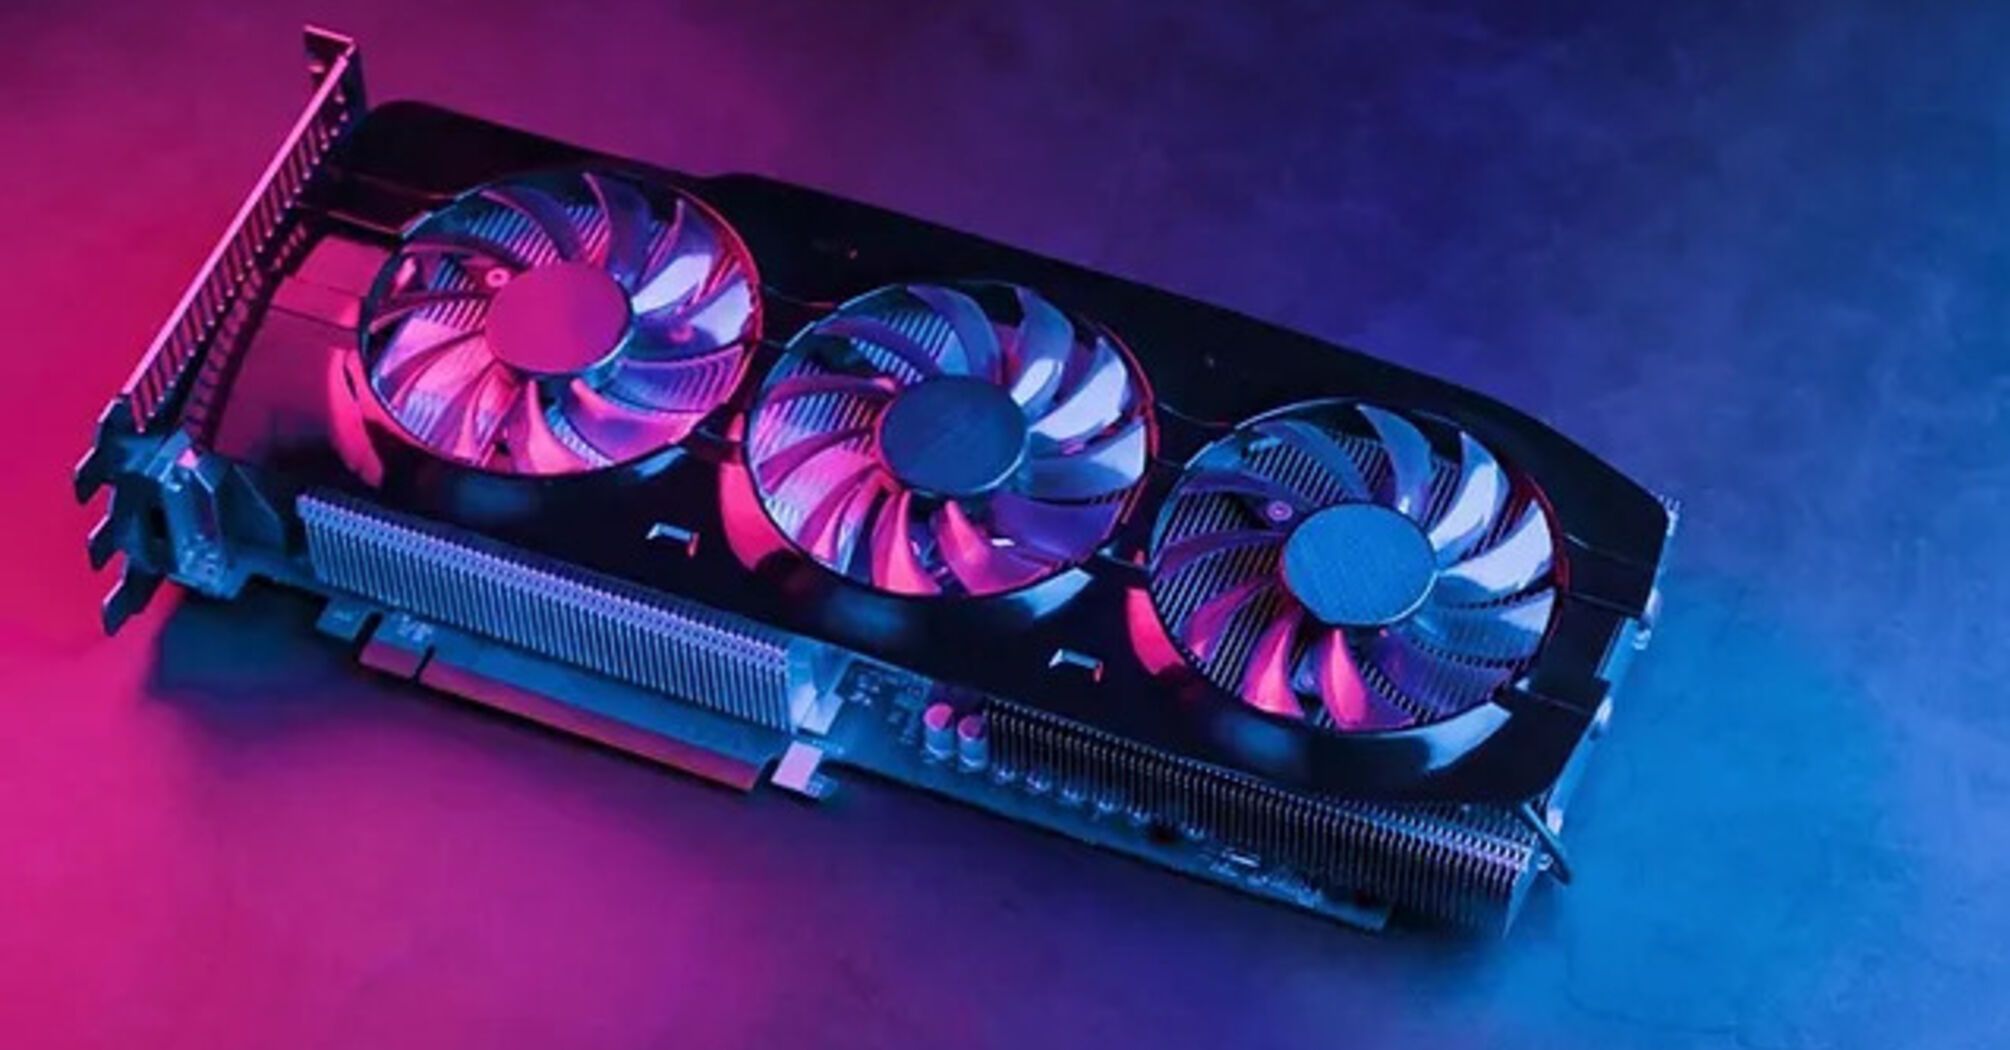 How to choose the right video card